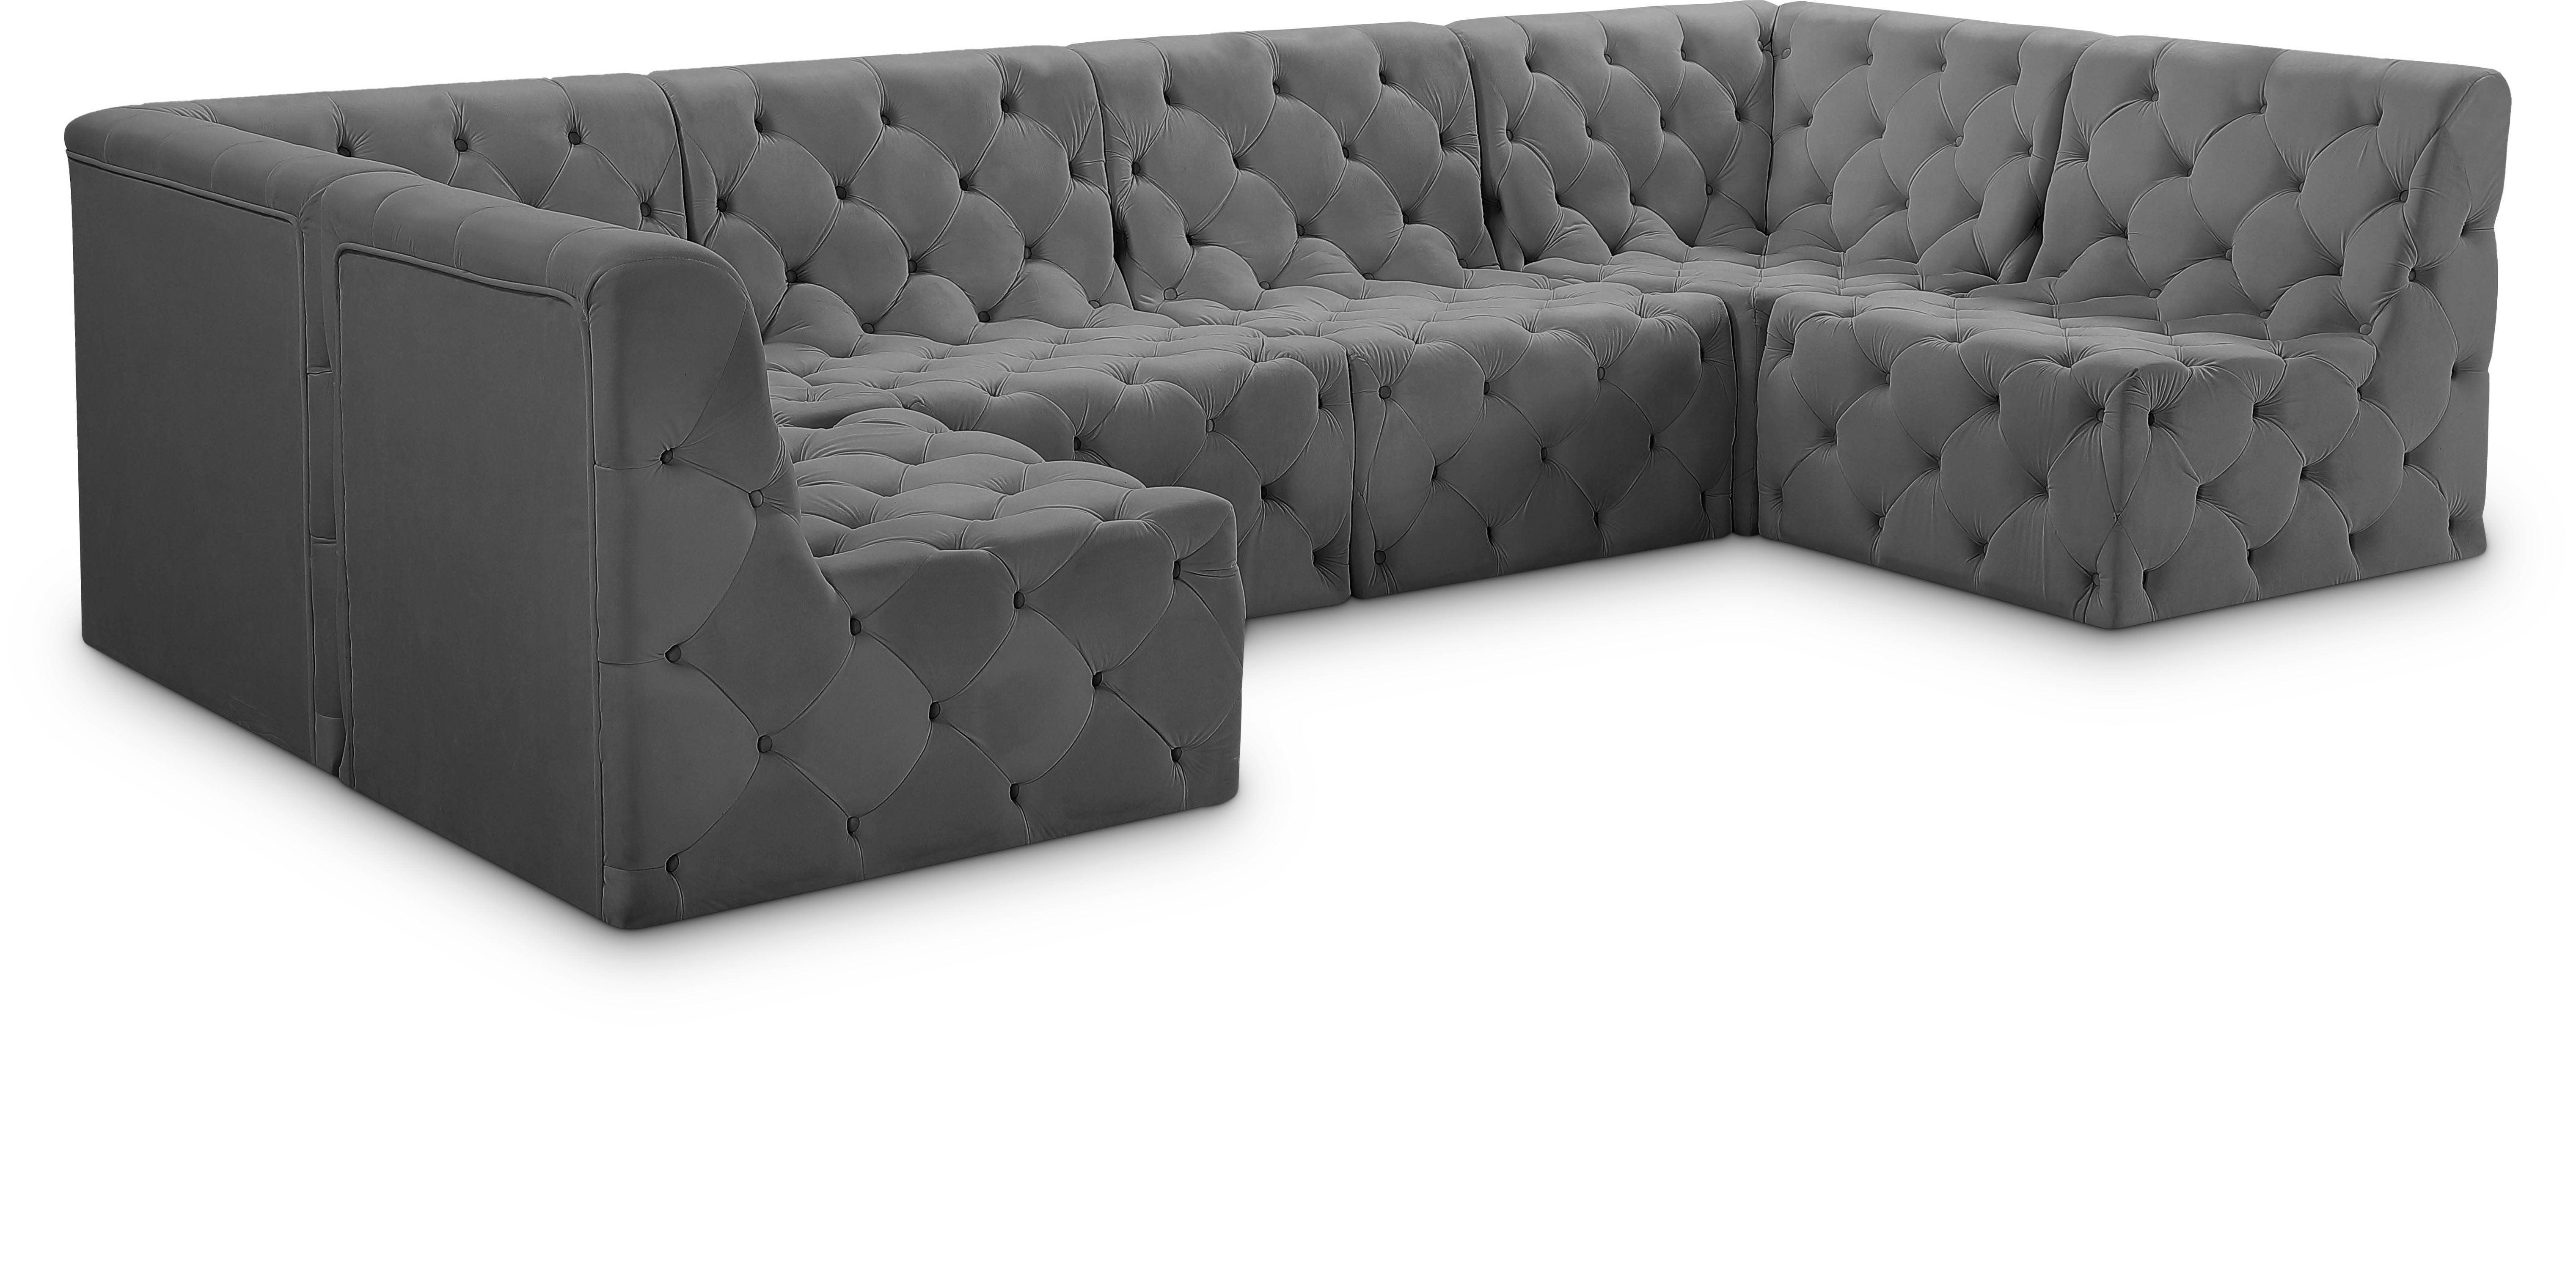 Meridian Furniture - Tuft - Modular Sectional 6 Piece - Gray - Modern & Contemporary - 5th Avenue Furniture